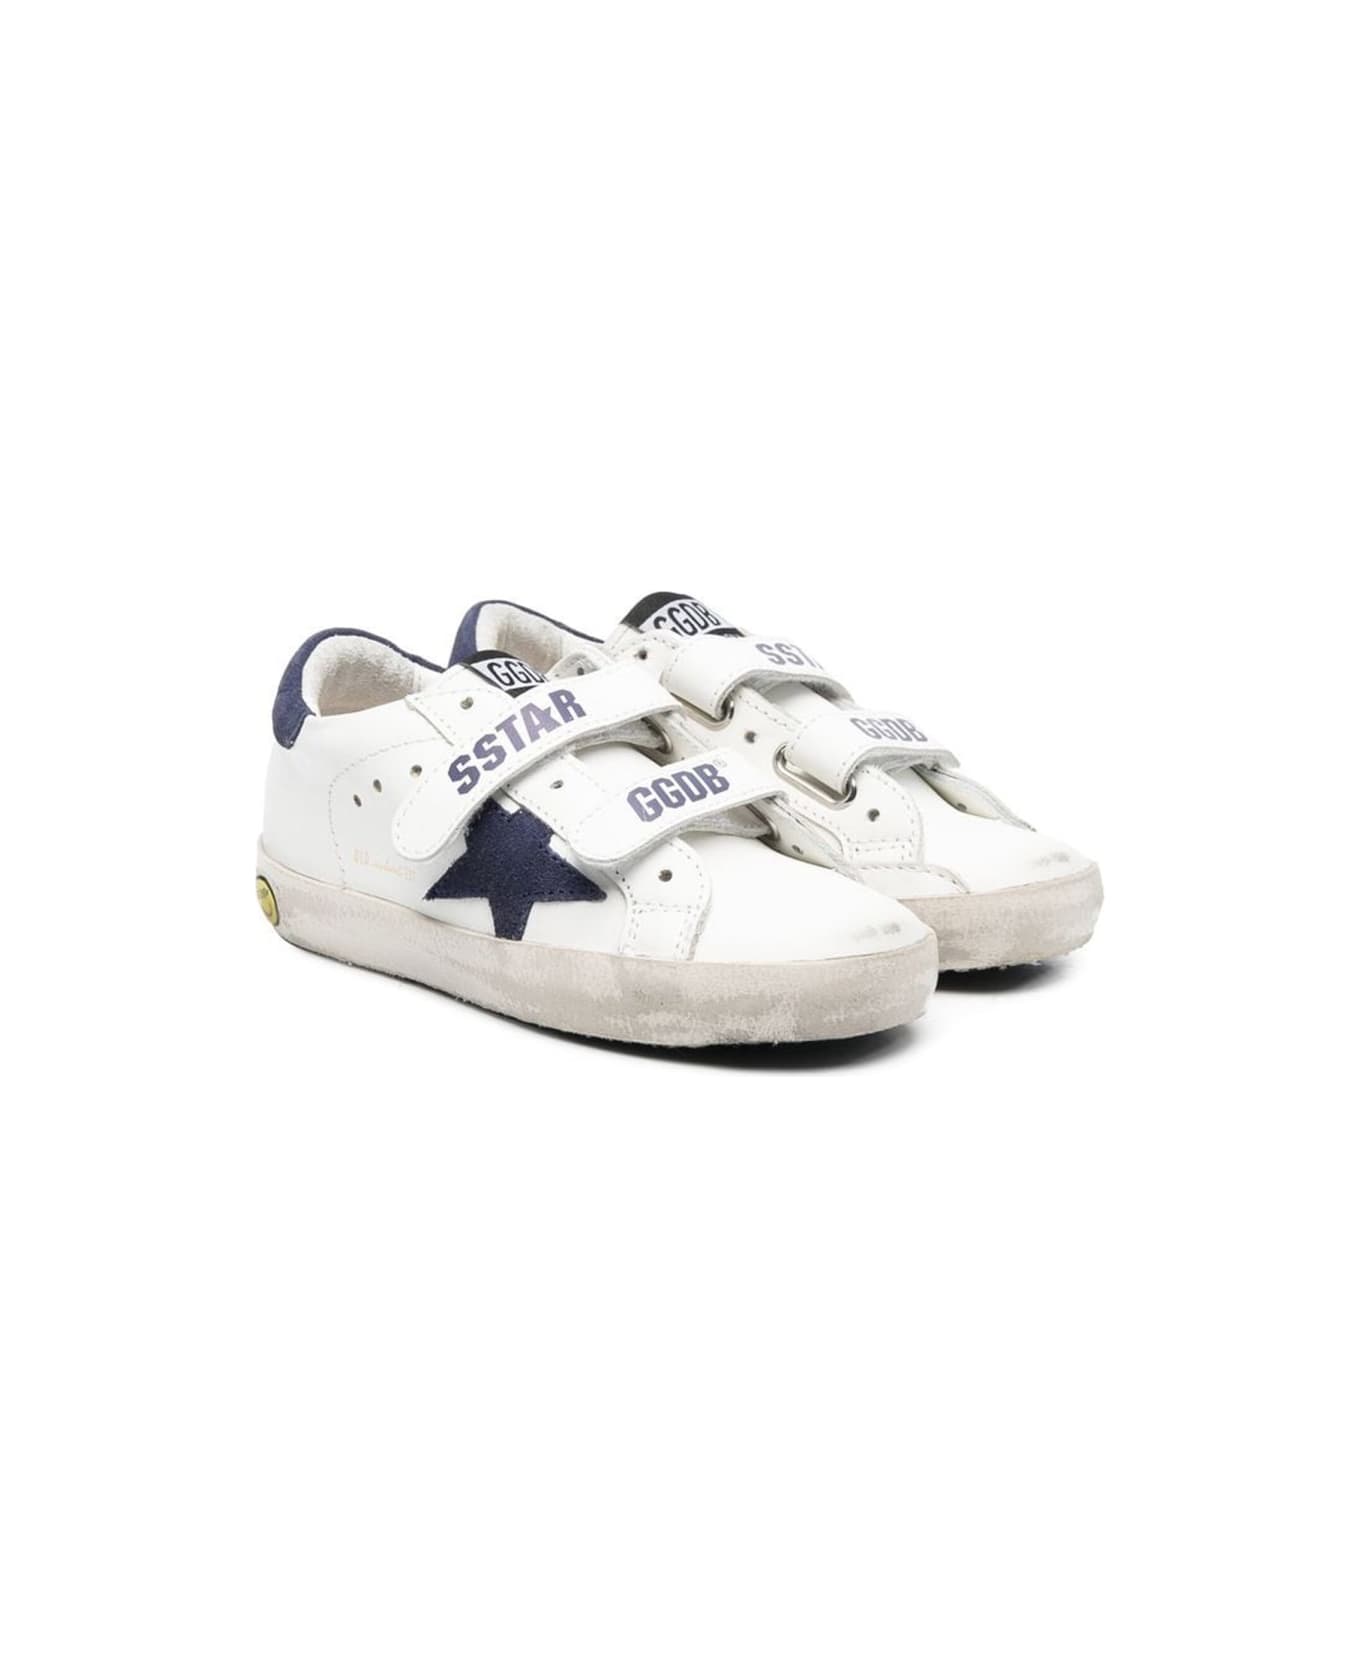 Golden Goose Old School Leather Upper Suede Star And Heel - WHITE シューズ